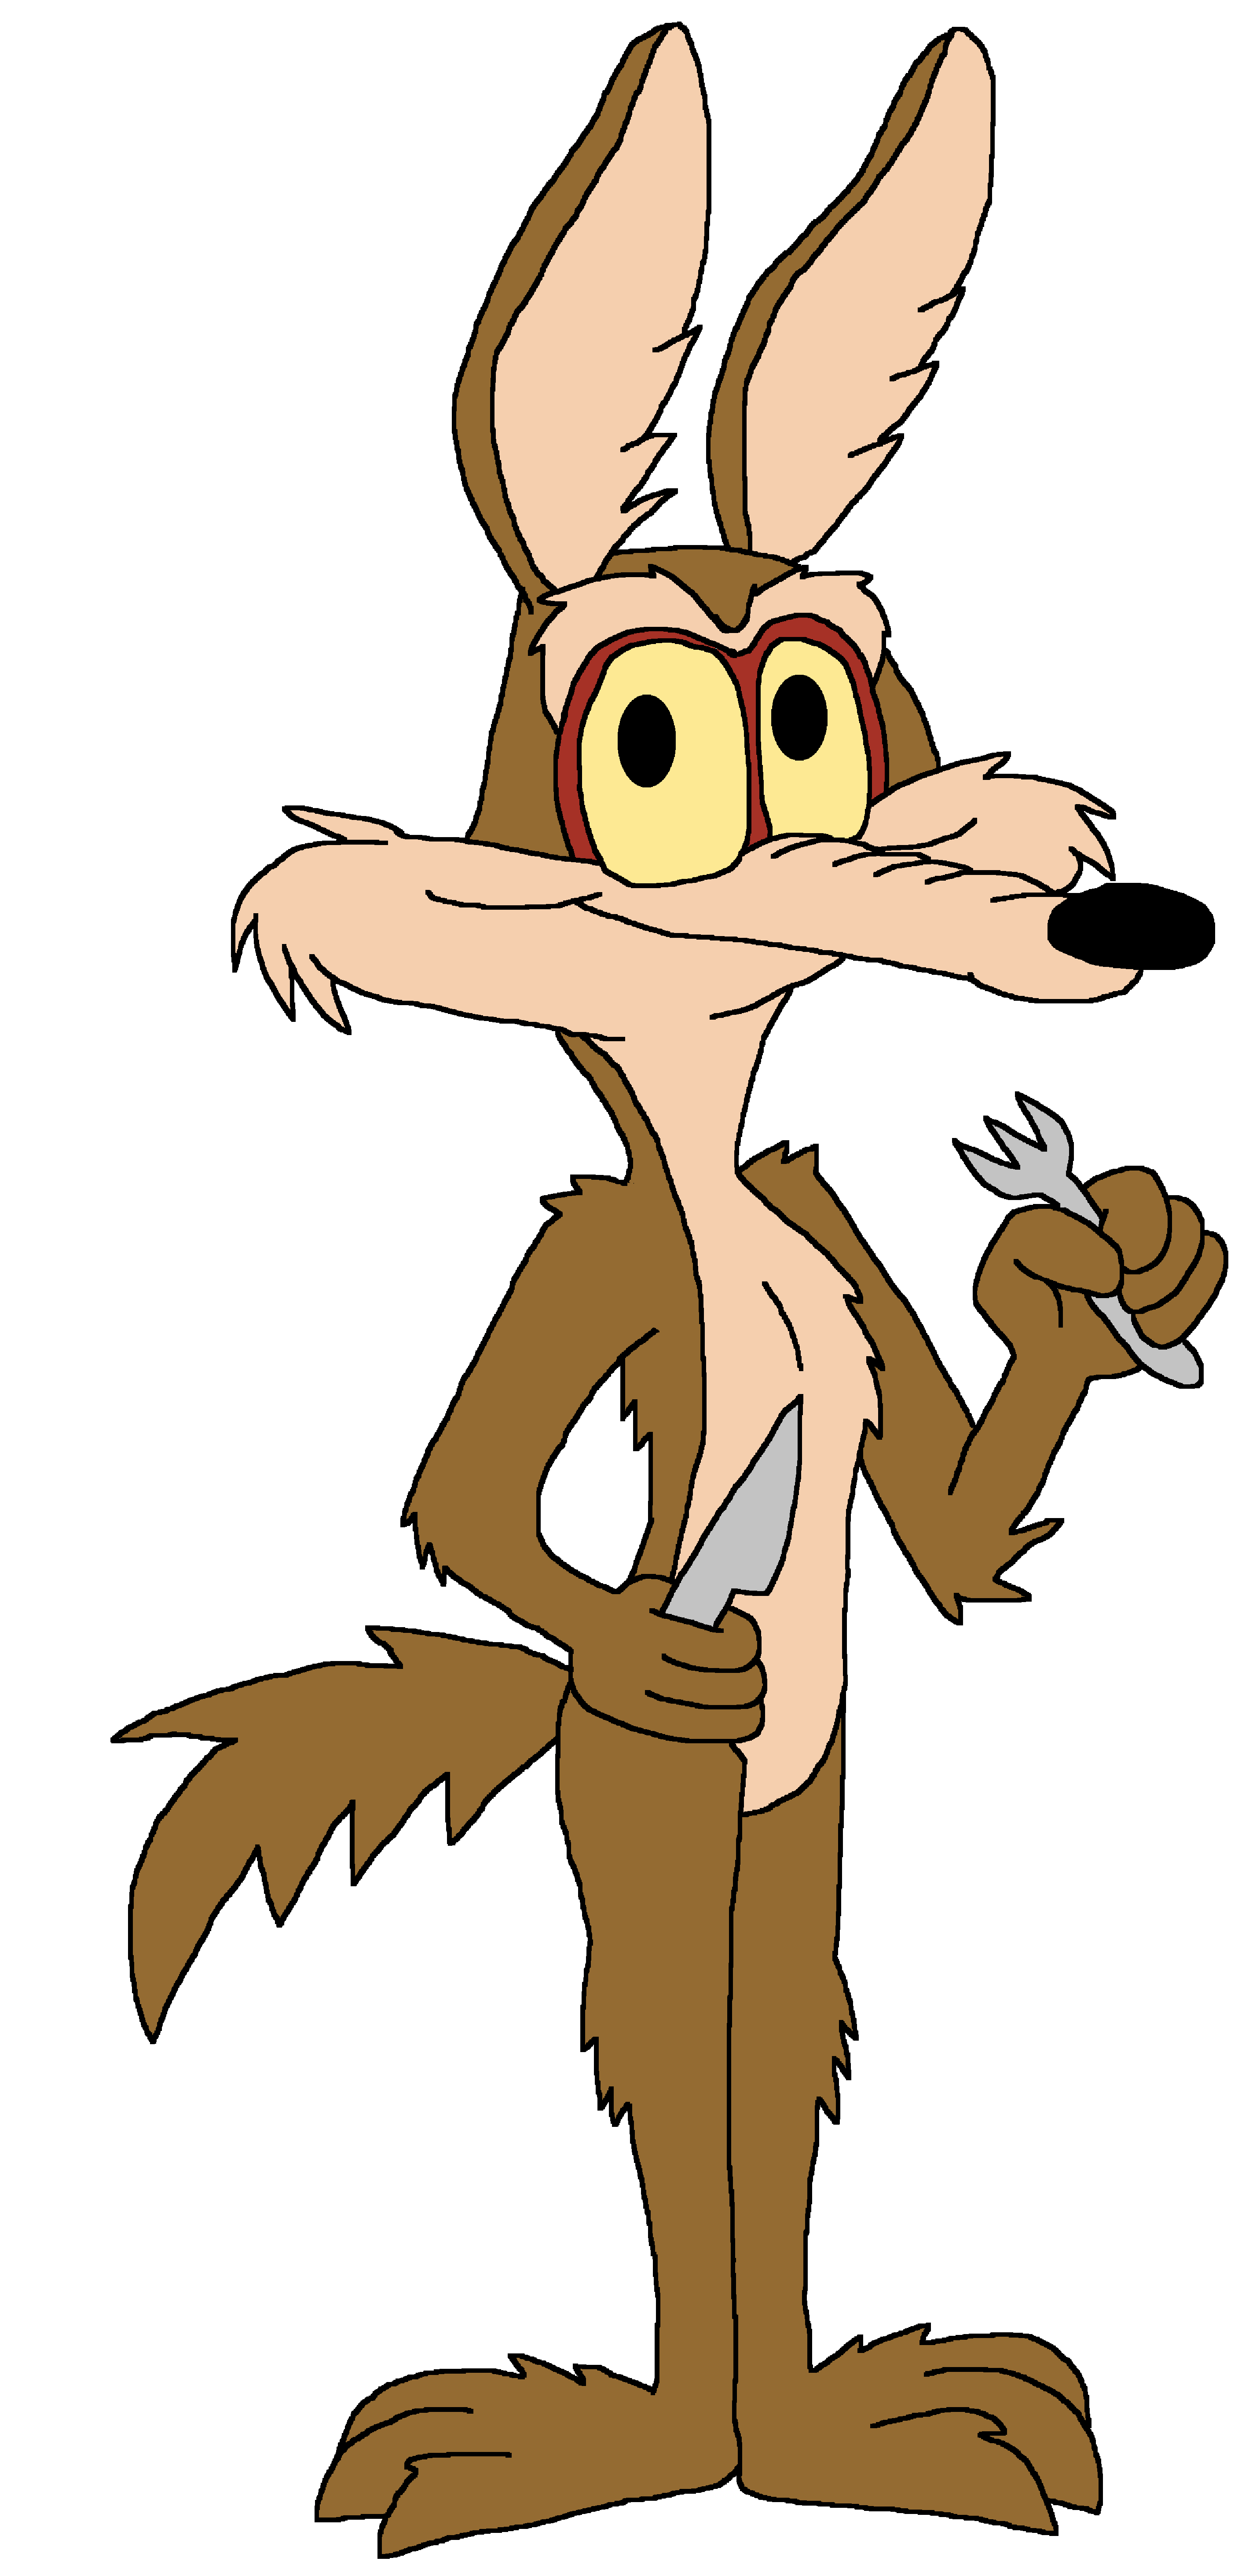 Wile E. Coyote by ChristopherBland on DeviantArt